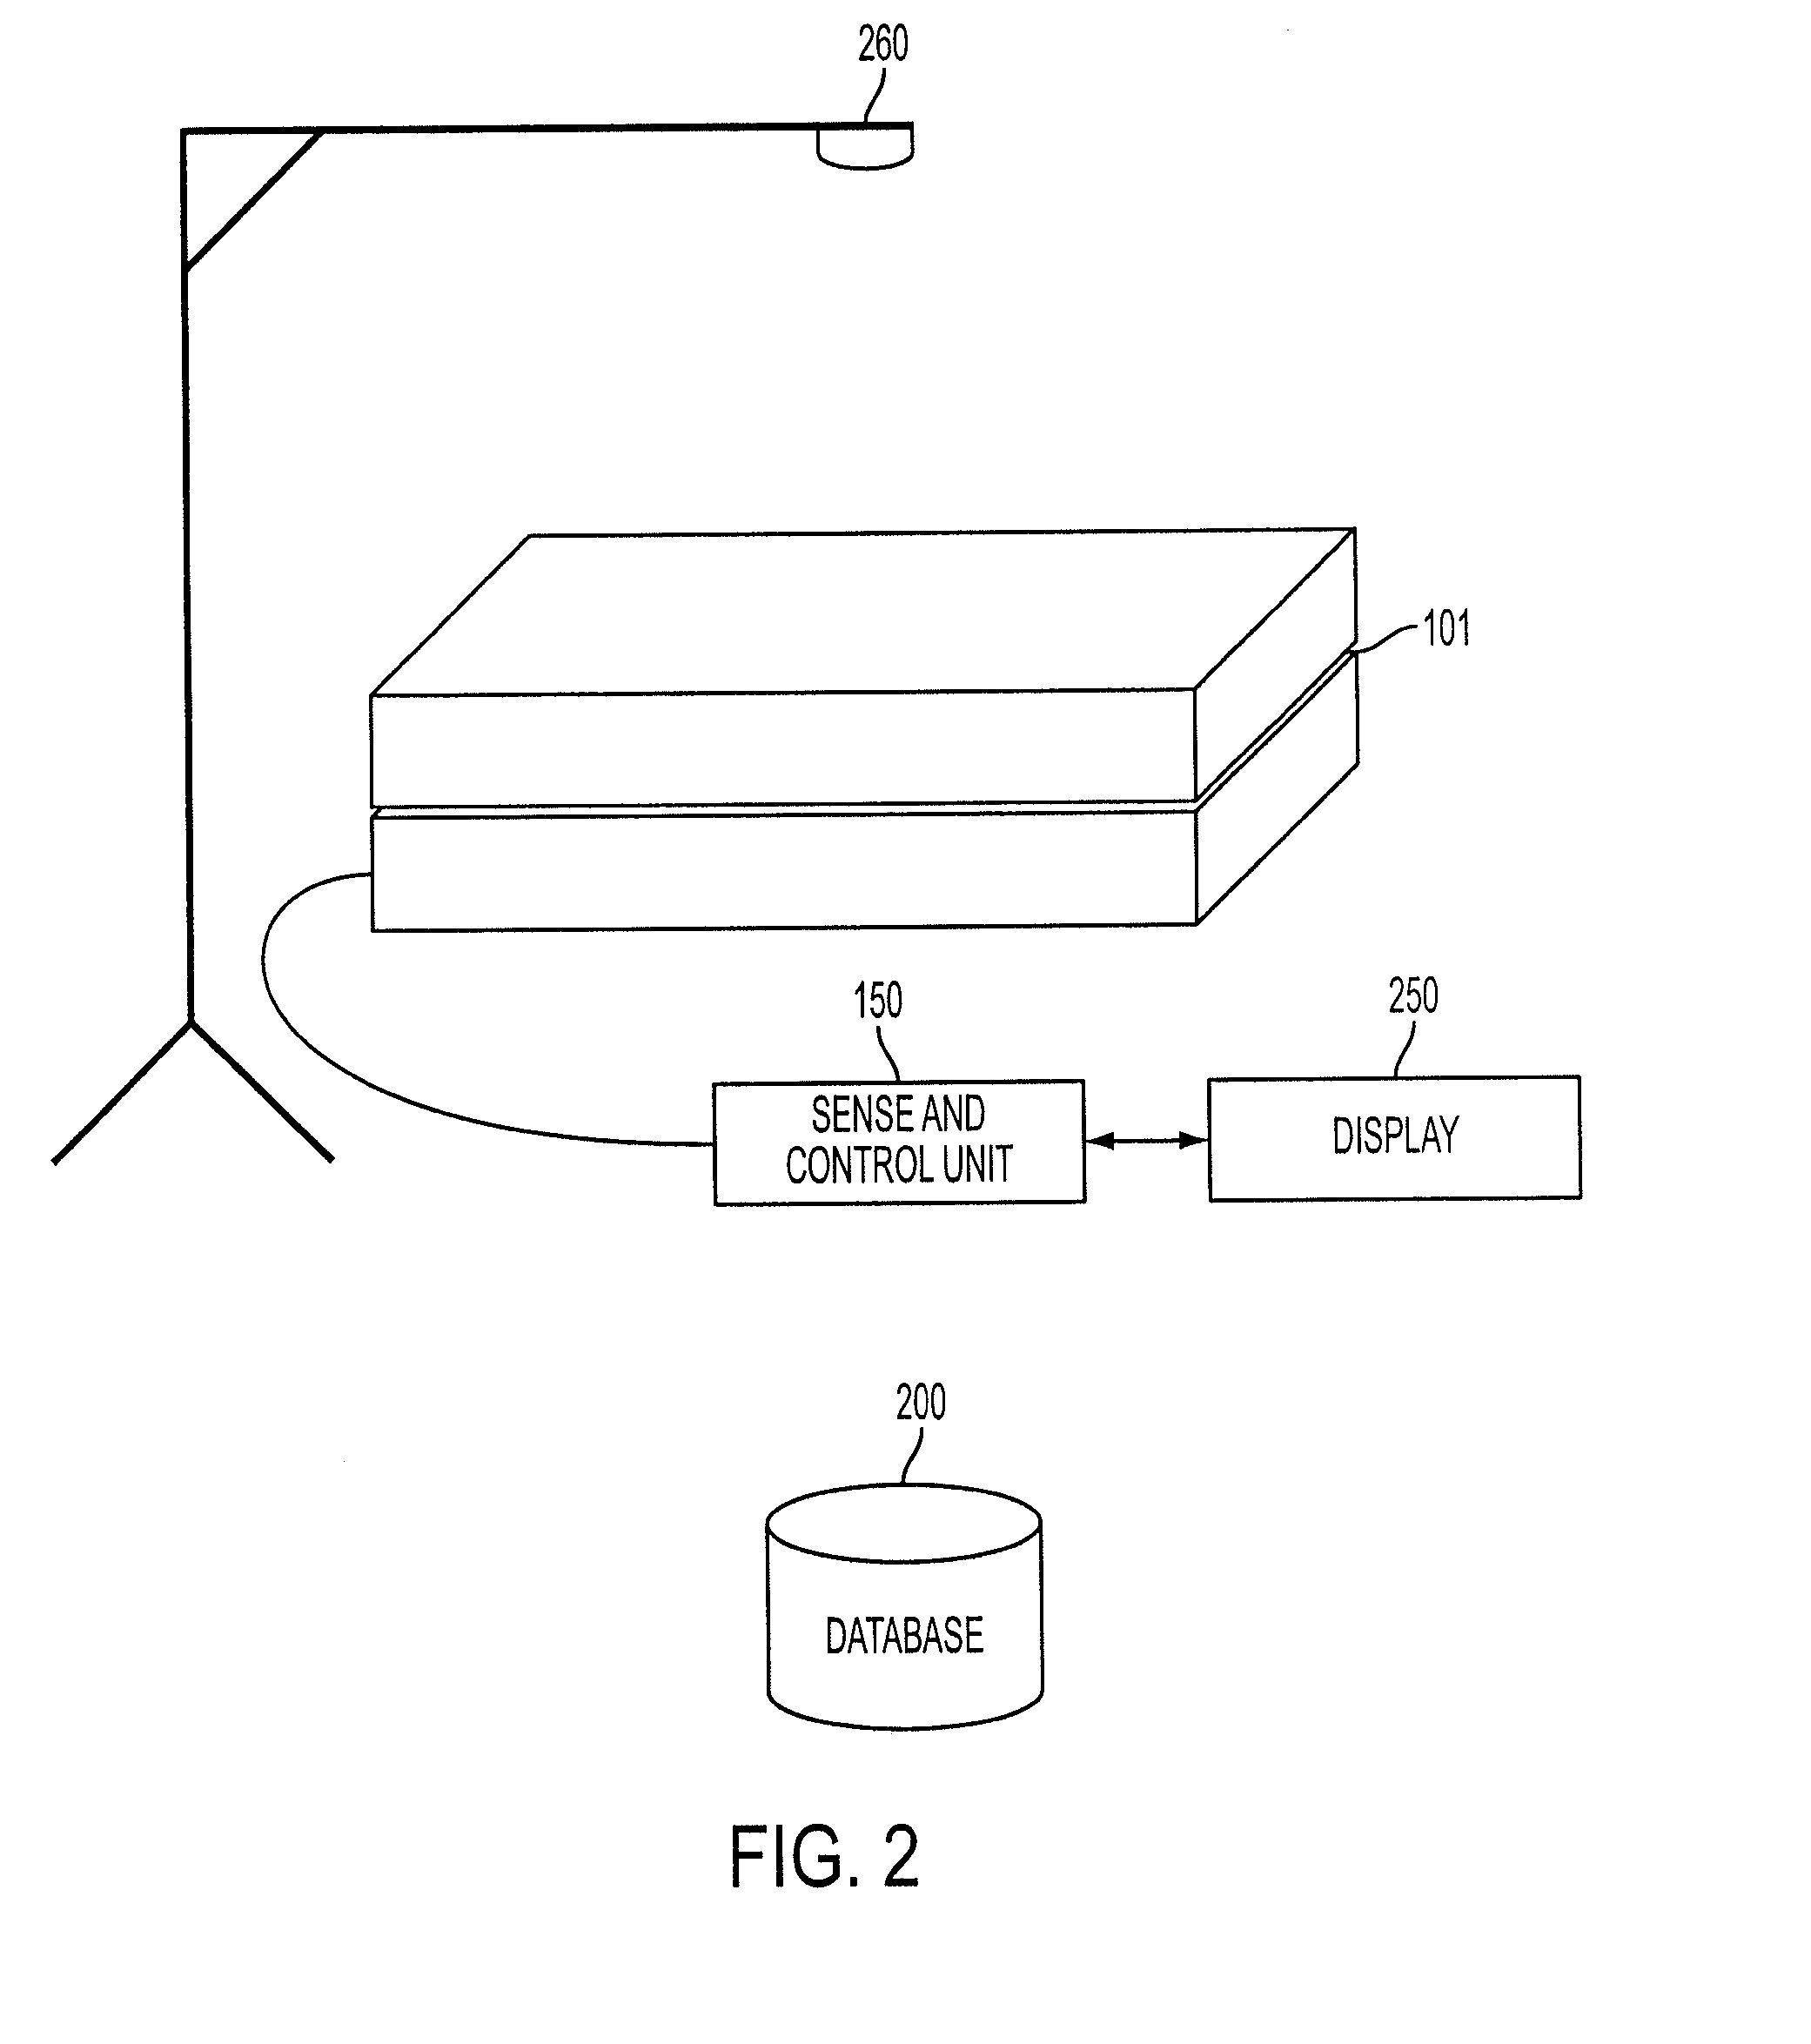 Apparatuses and methods for evaluating a person for a sleep system